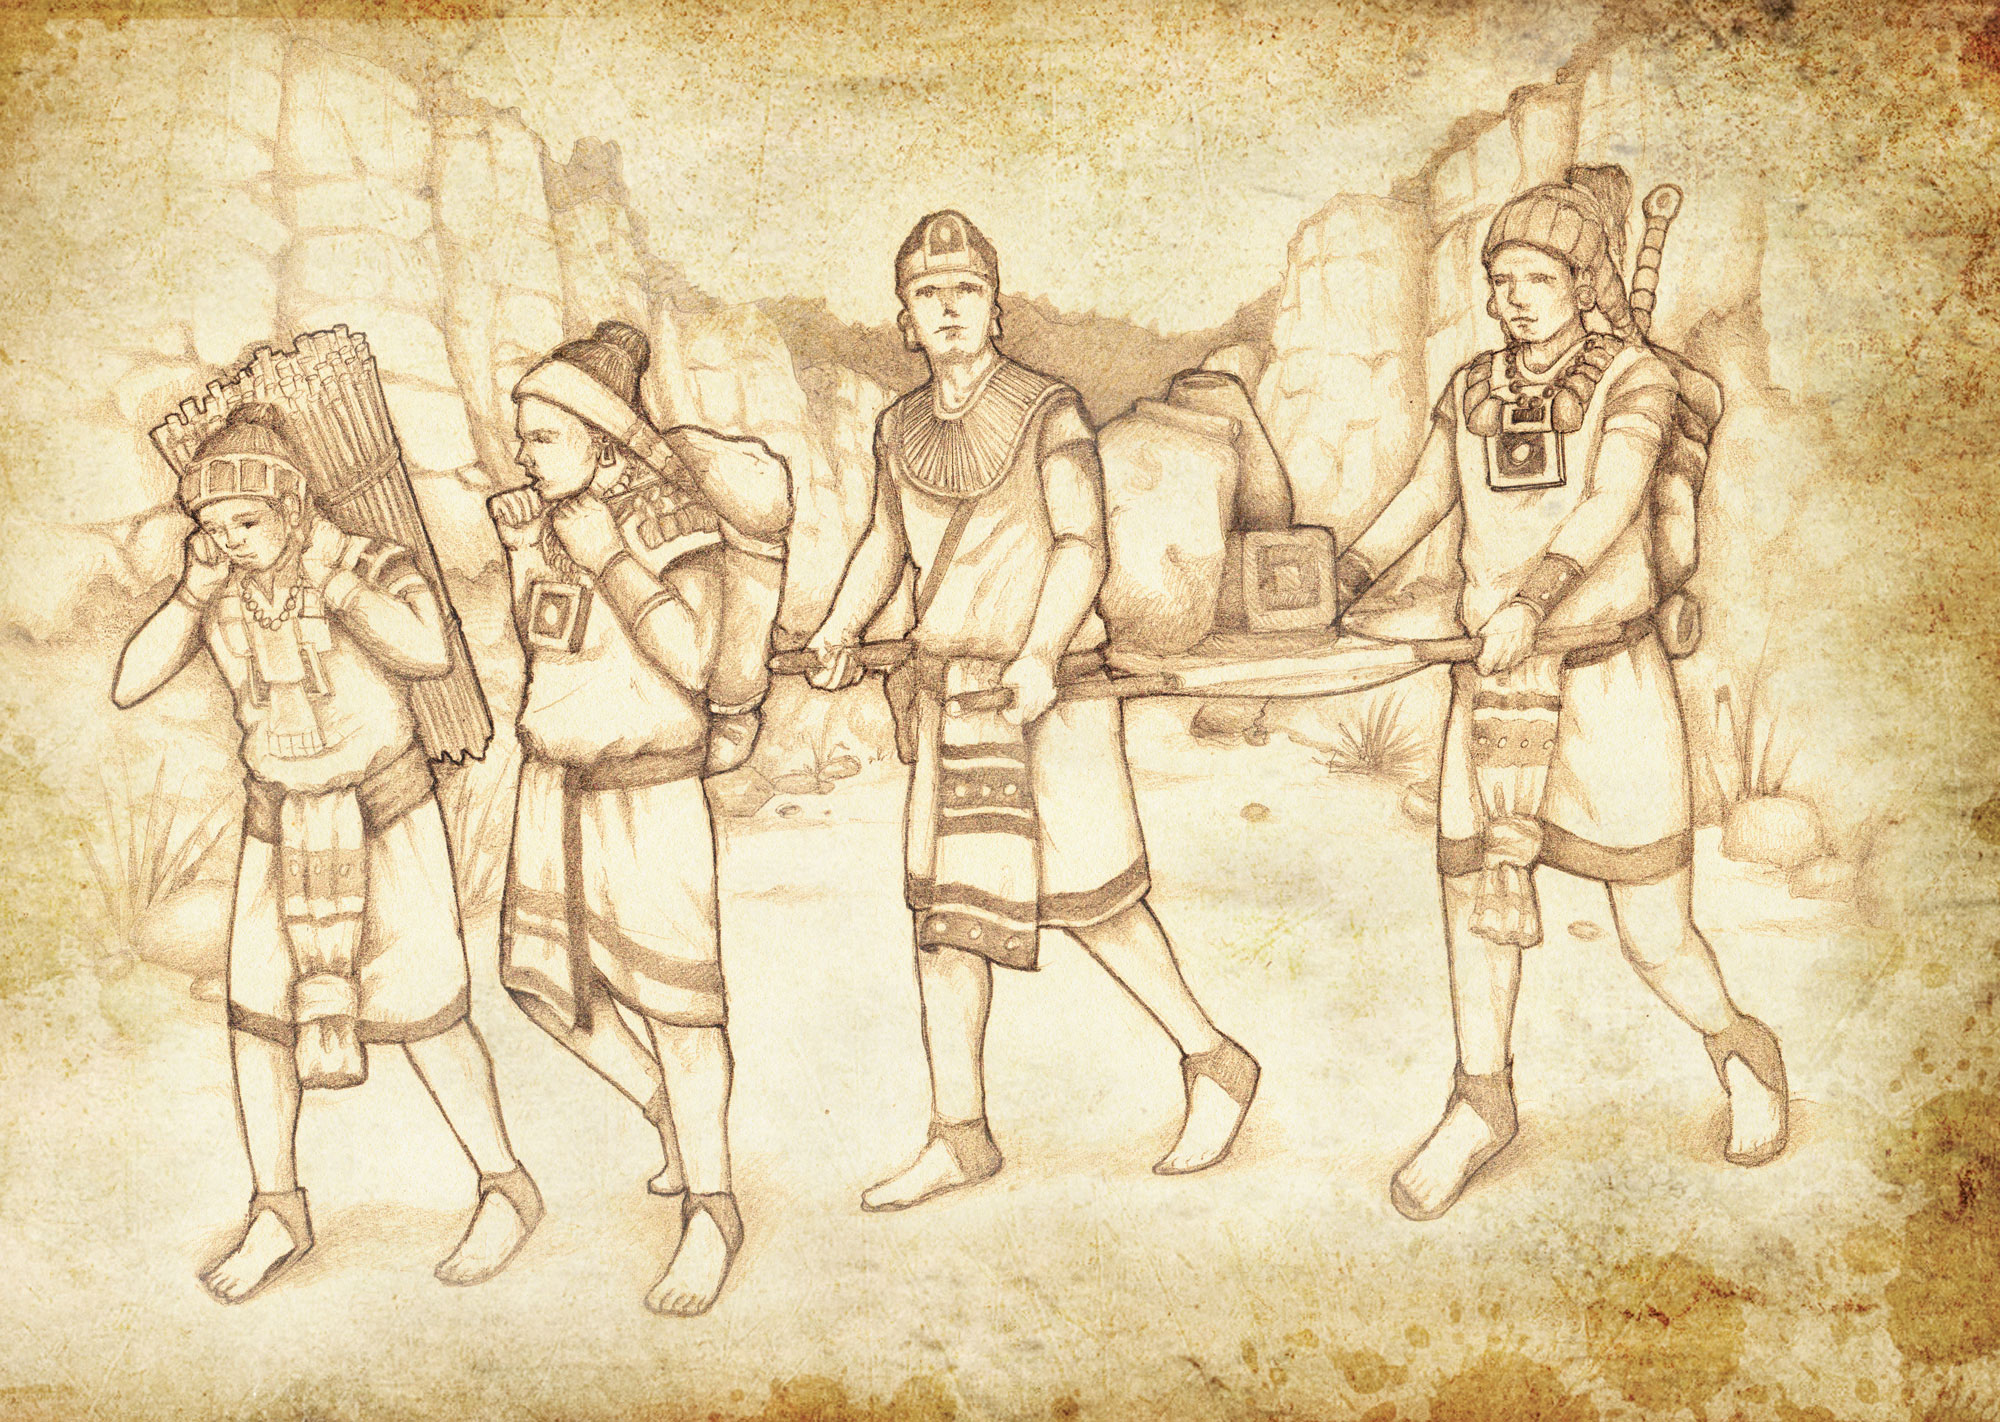 Image depicting Mesoamerican warriors carrying their packs of supplies on their backs. Image by Jody Livingston.